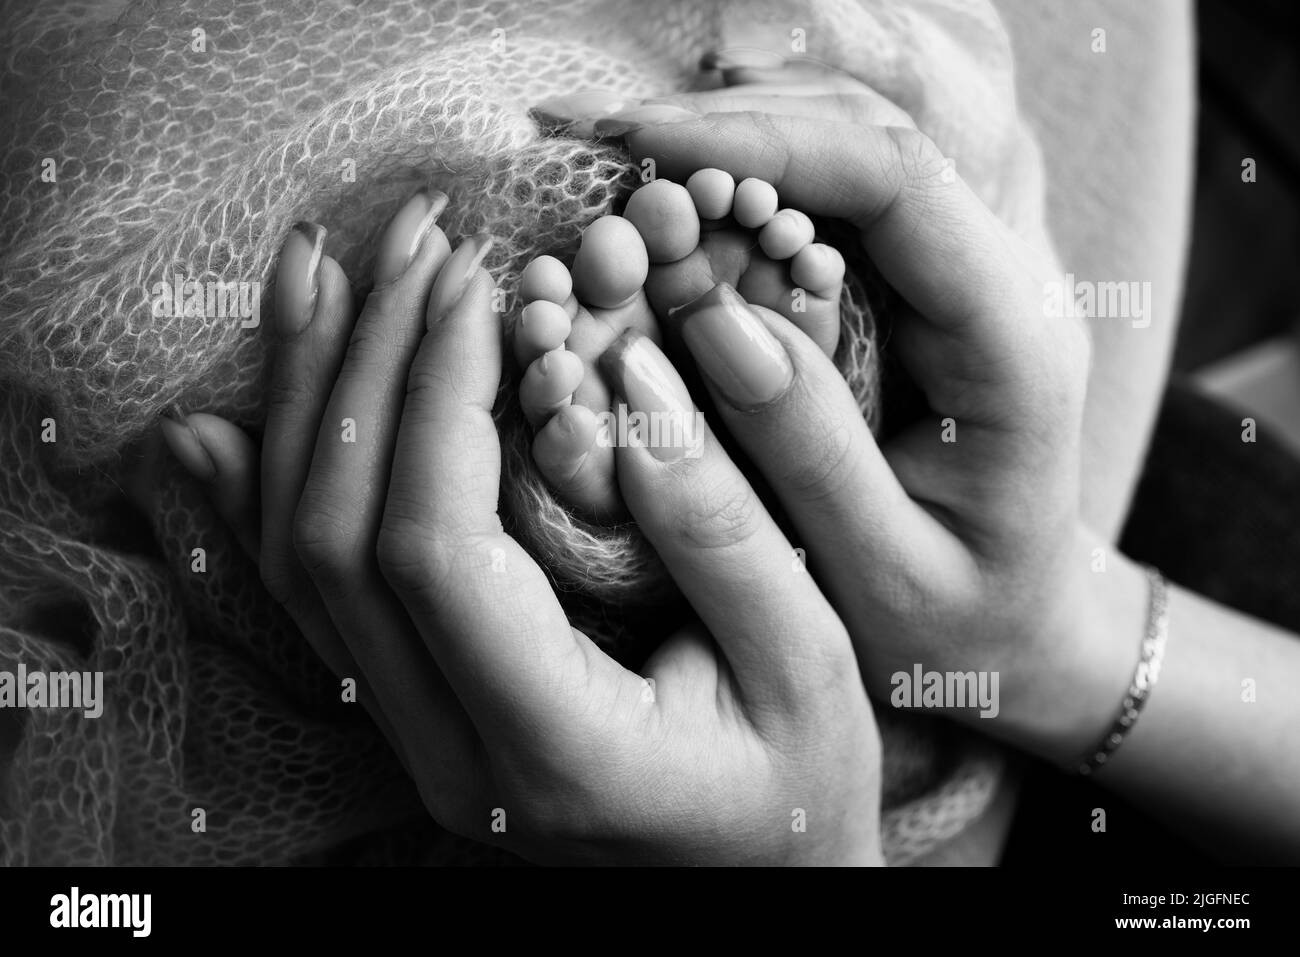 The palms of the father, the mother are holding the foot of the newborn baby. Feet of baby on the palms of the parents.  Stock Photo